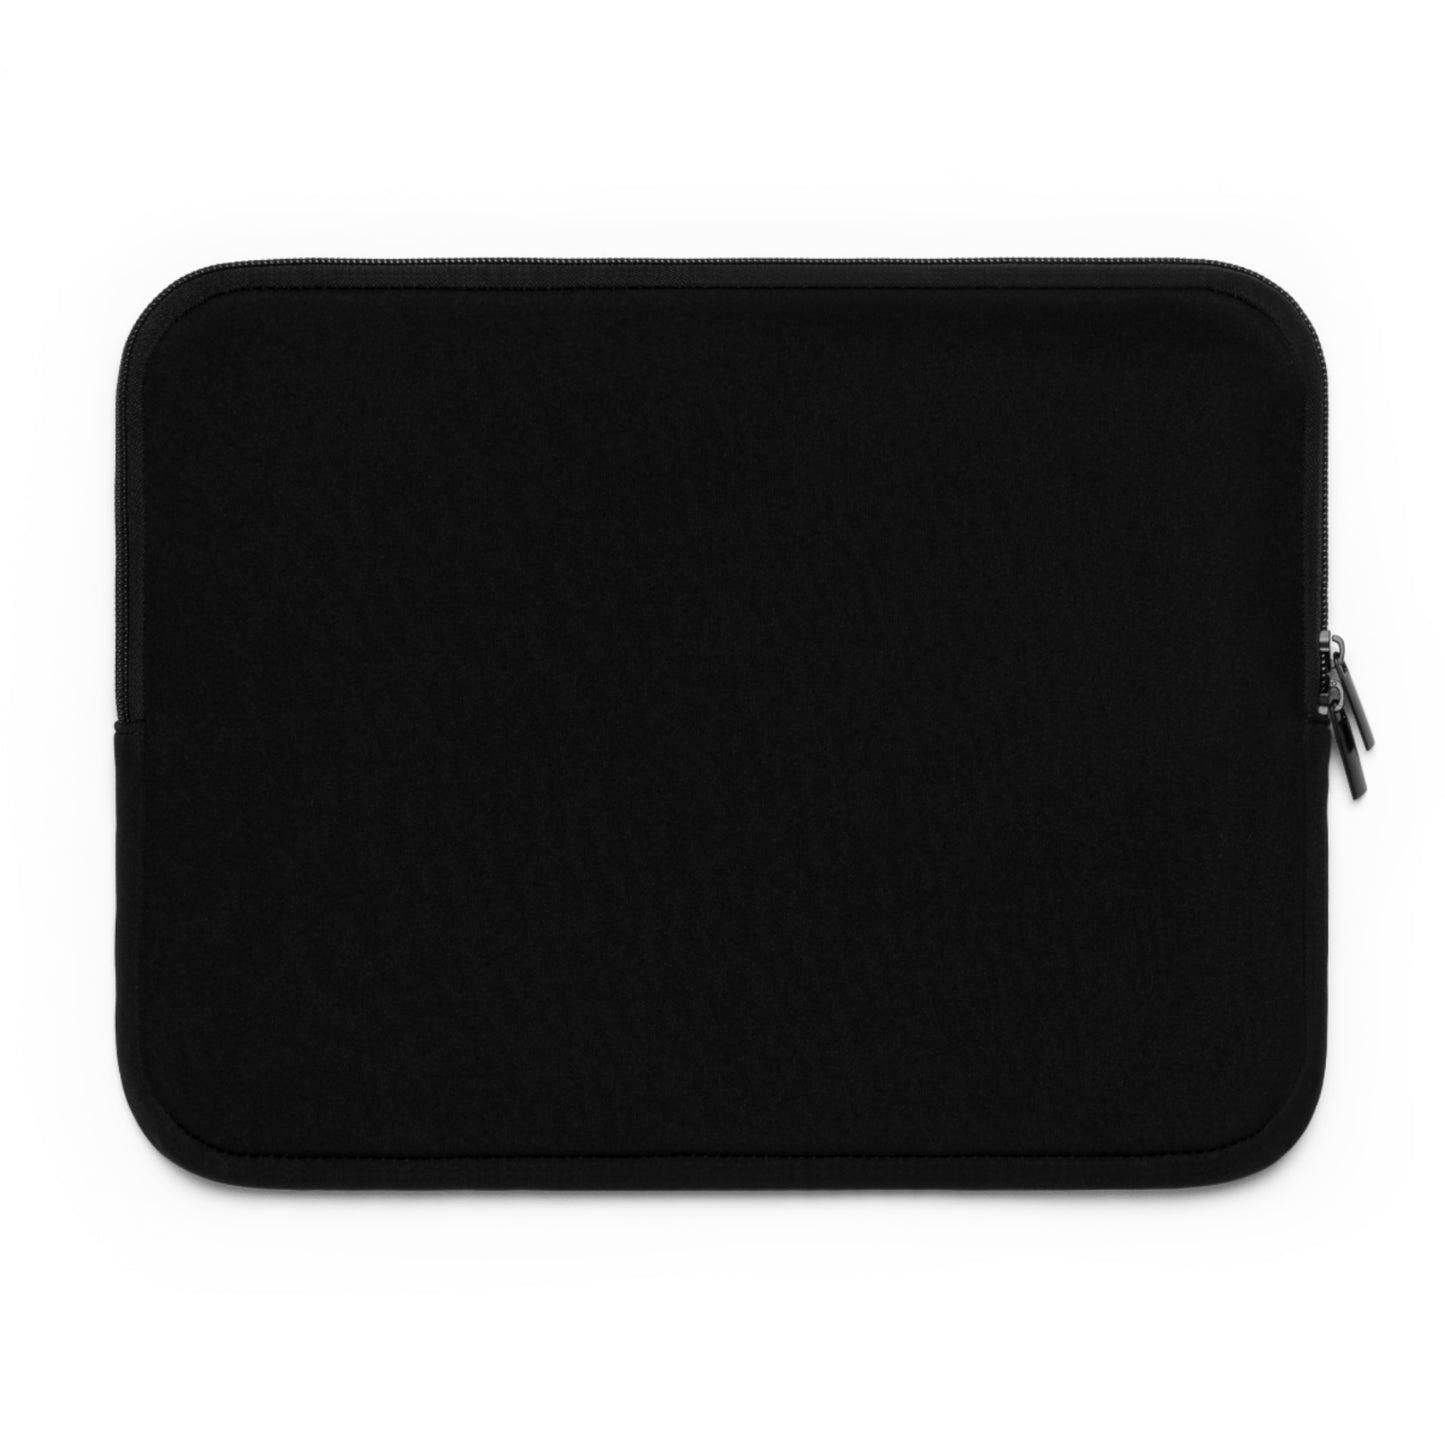 The Muse Of Rome Laptop Sleeve